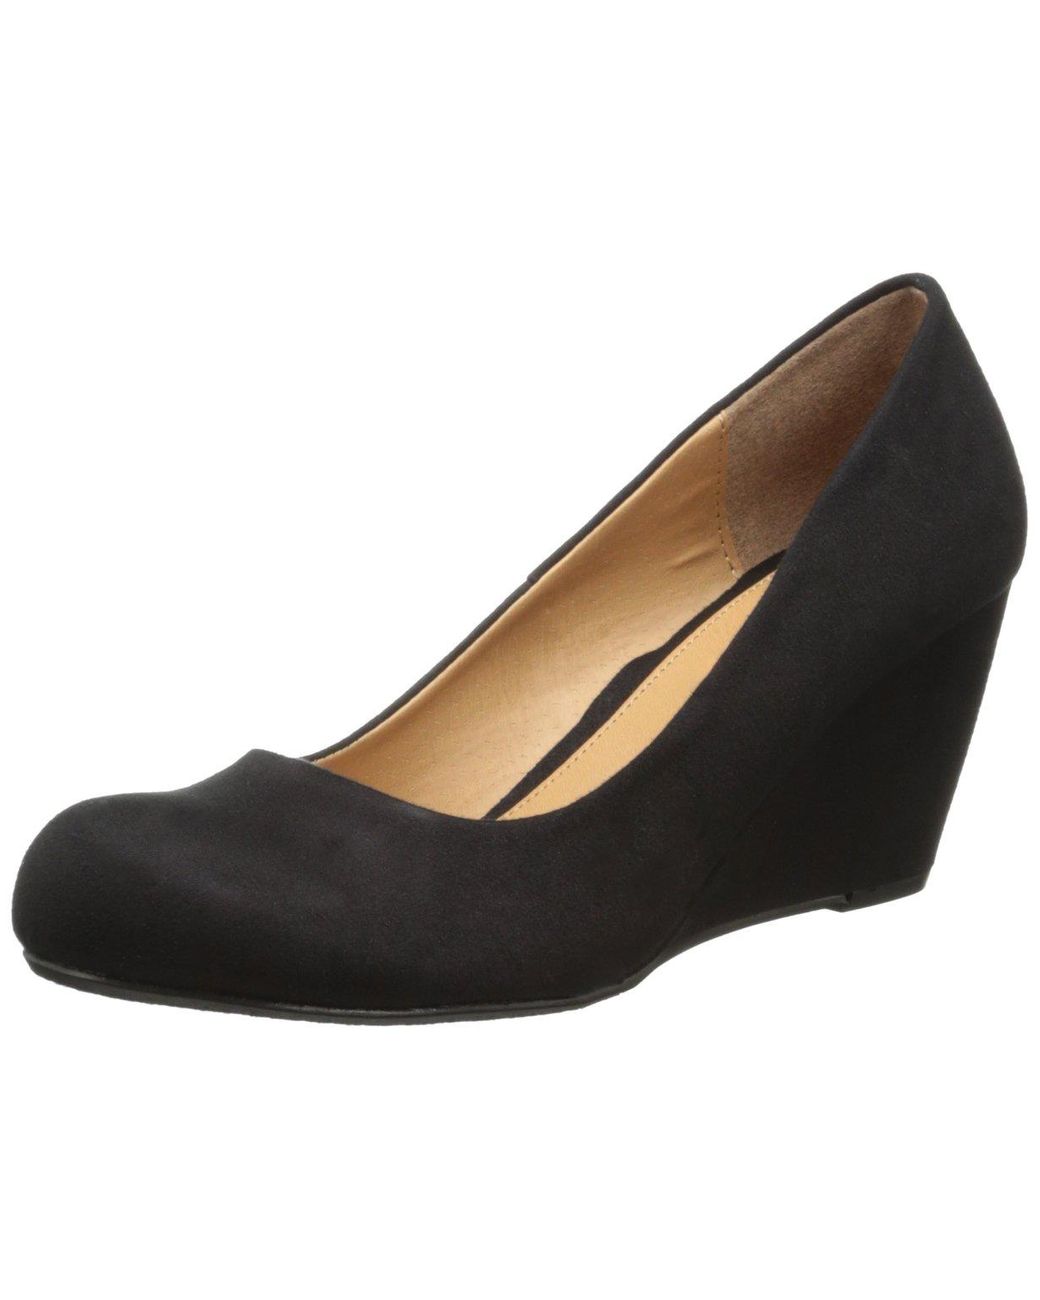 CL By Chinese Laundry Nima Wedge Pump in Black | Lyst